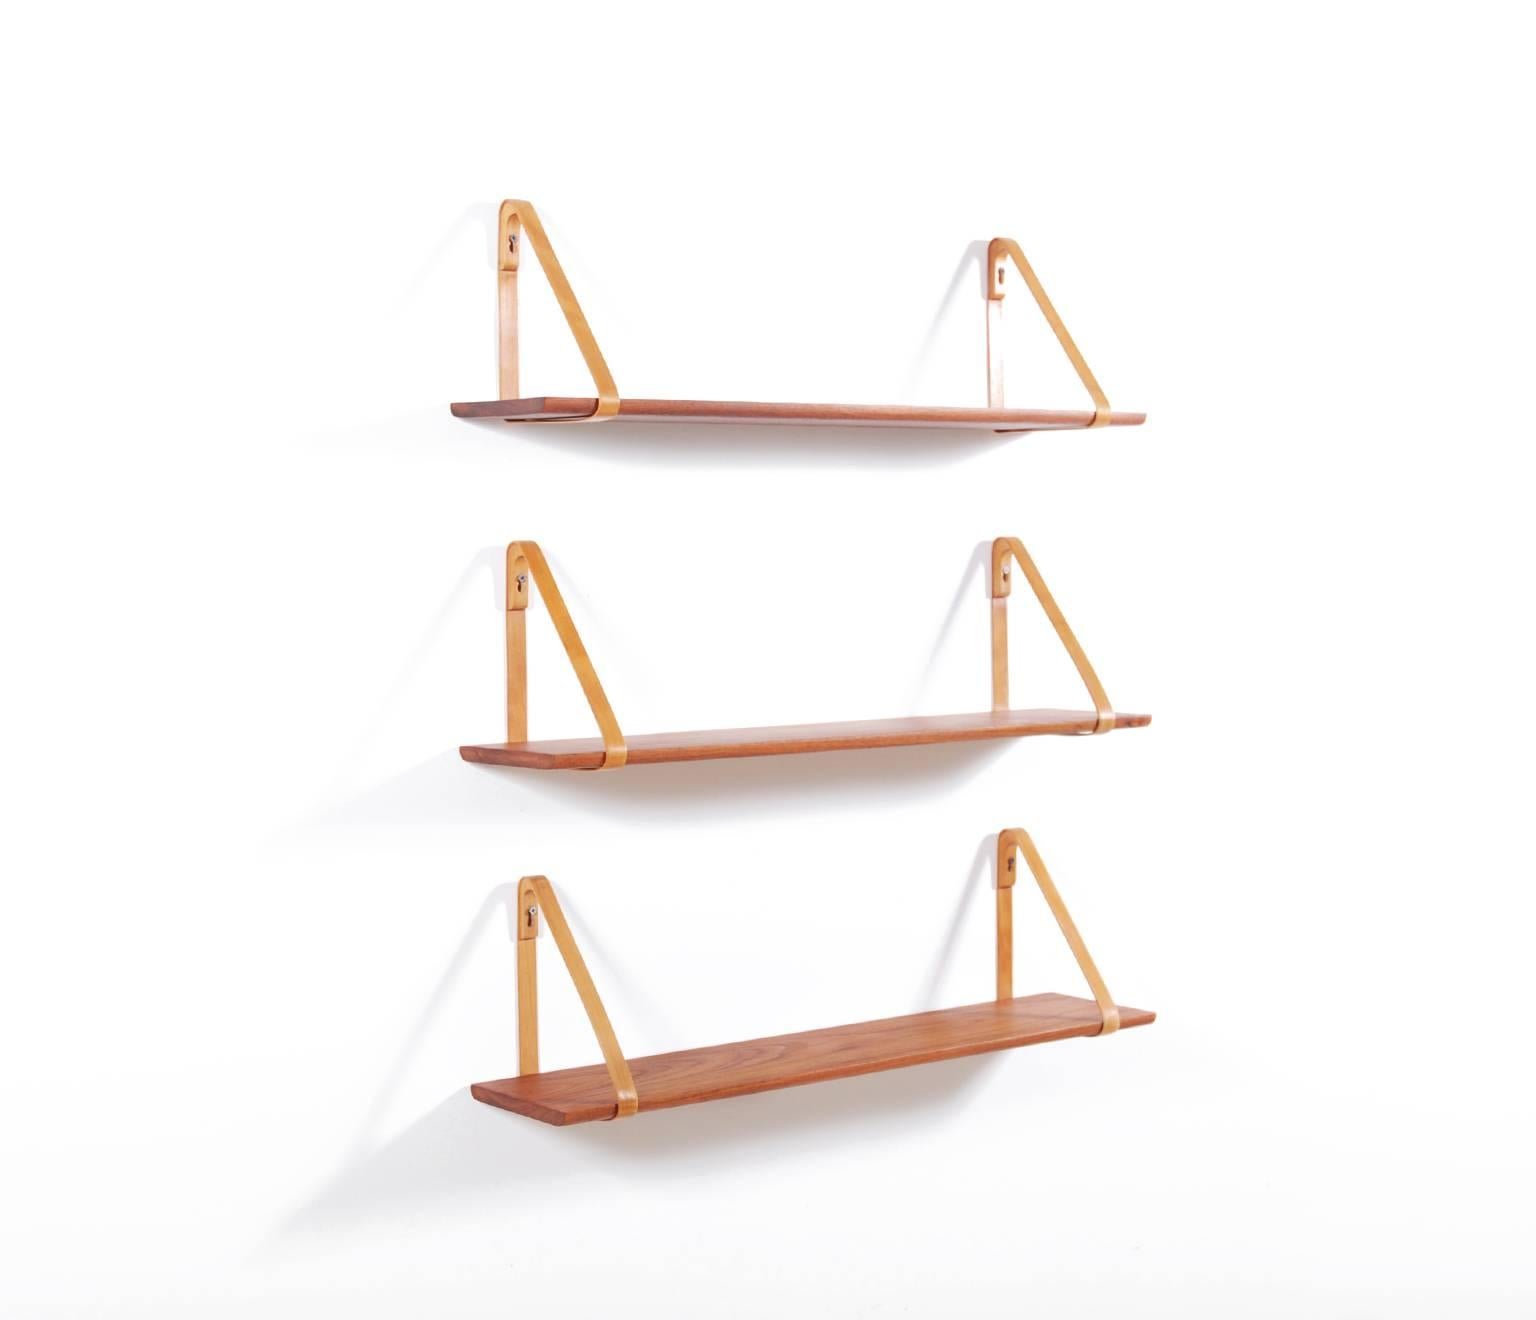 Rare wall-mounted shelves designed by Kristian Vedel at the end of the 1940s.
Manufactured by the cabinetmaker I. Christiansen, Denmark. 

Extremely fine and poetic work.

Massive teak boards, laminated beech, beech.

Parcel shipping